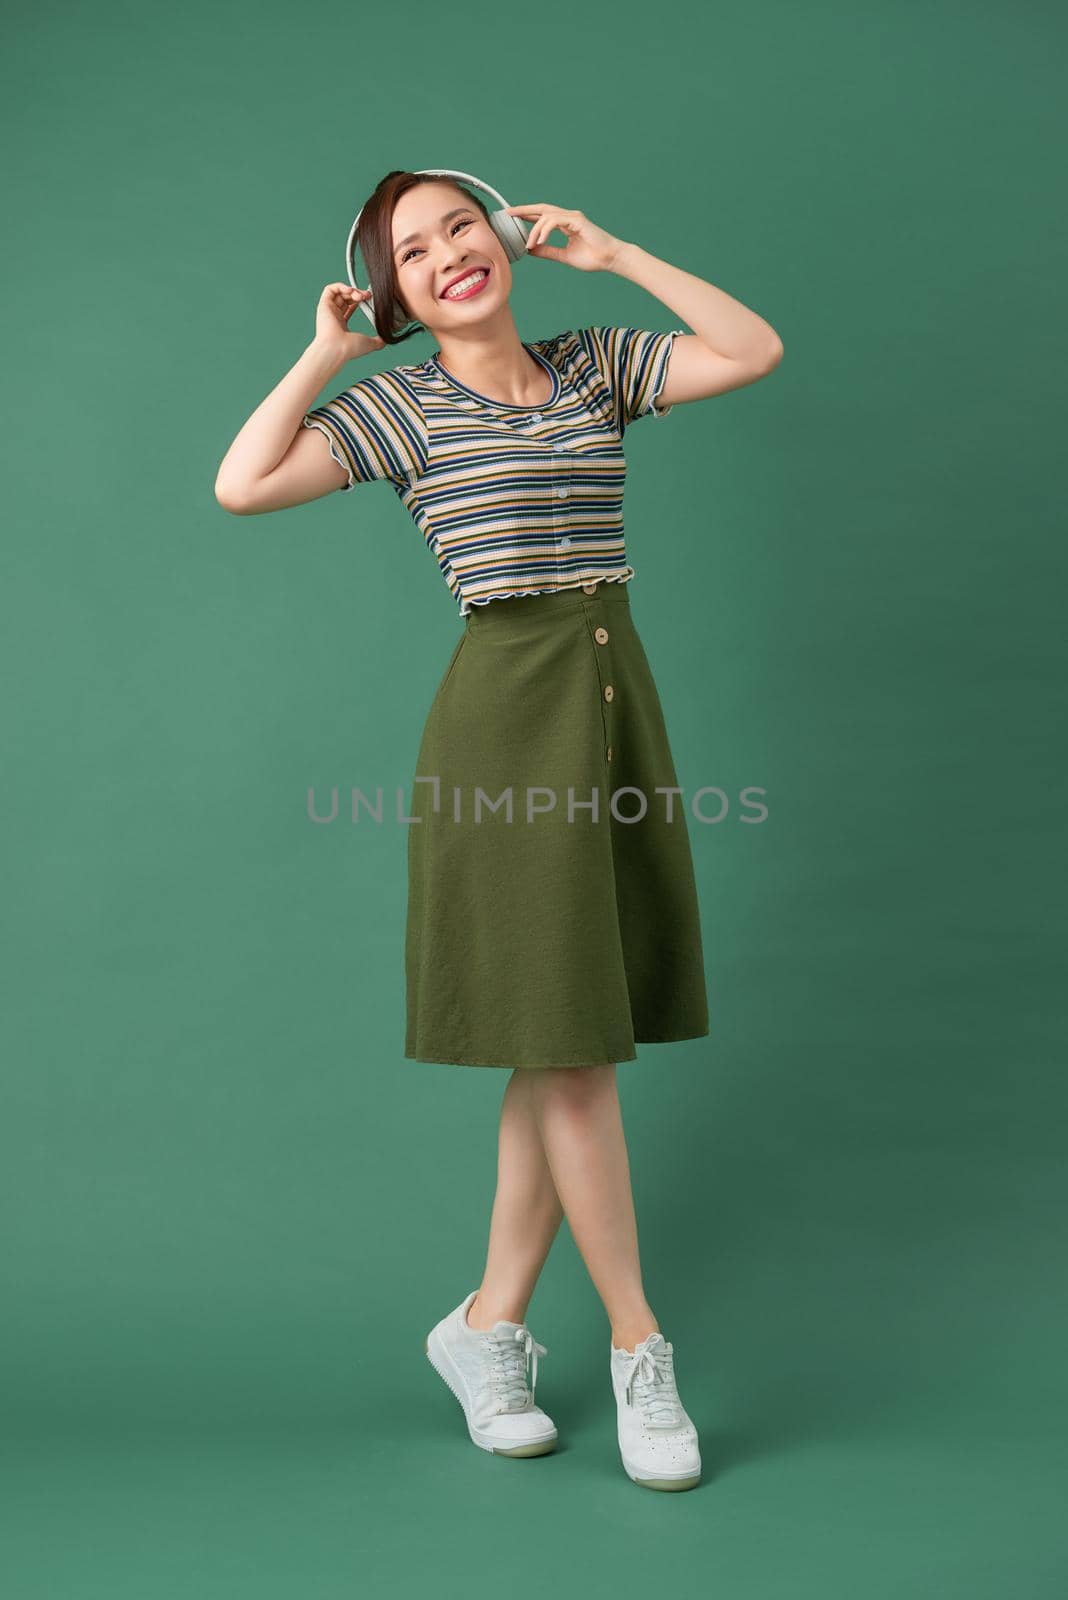 Music young girl dancing against isolated green background